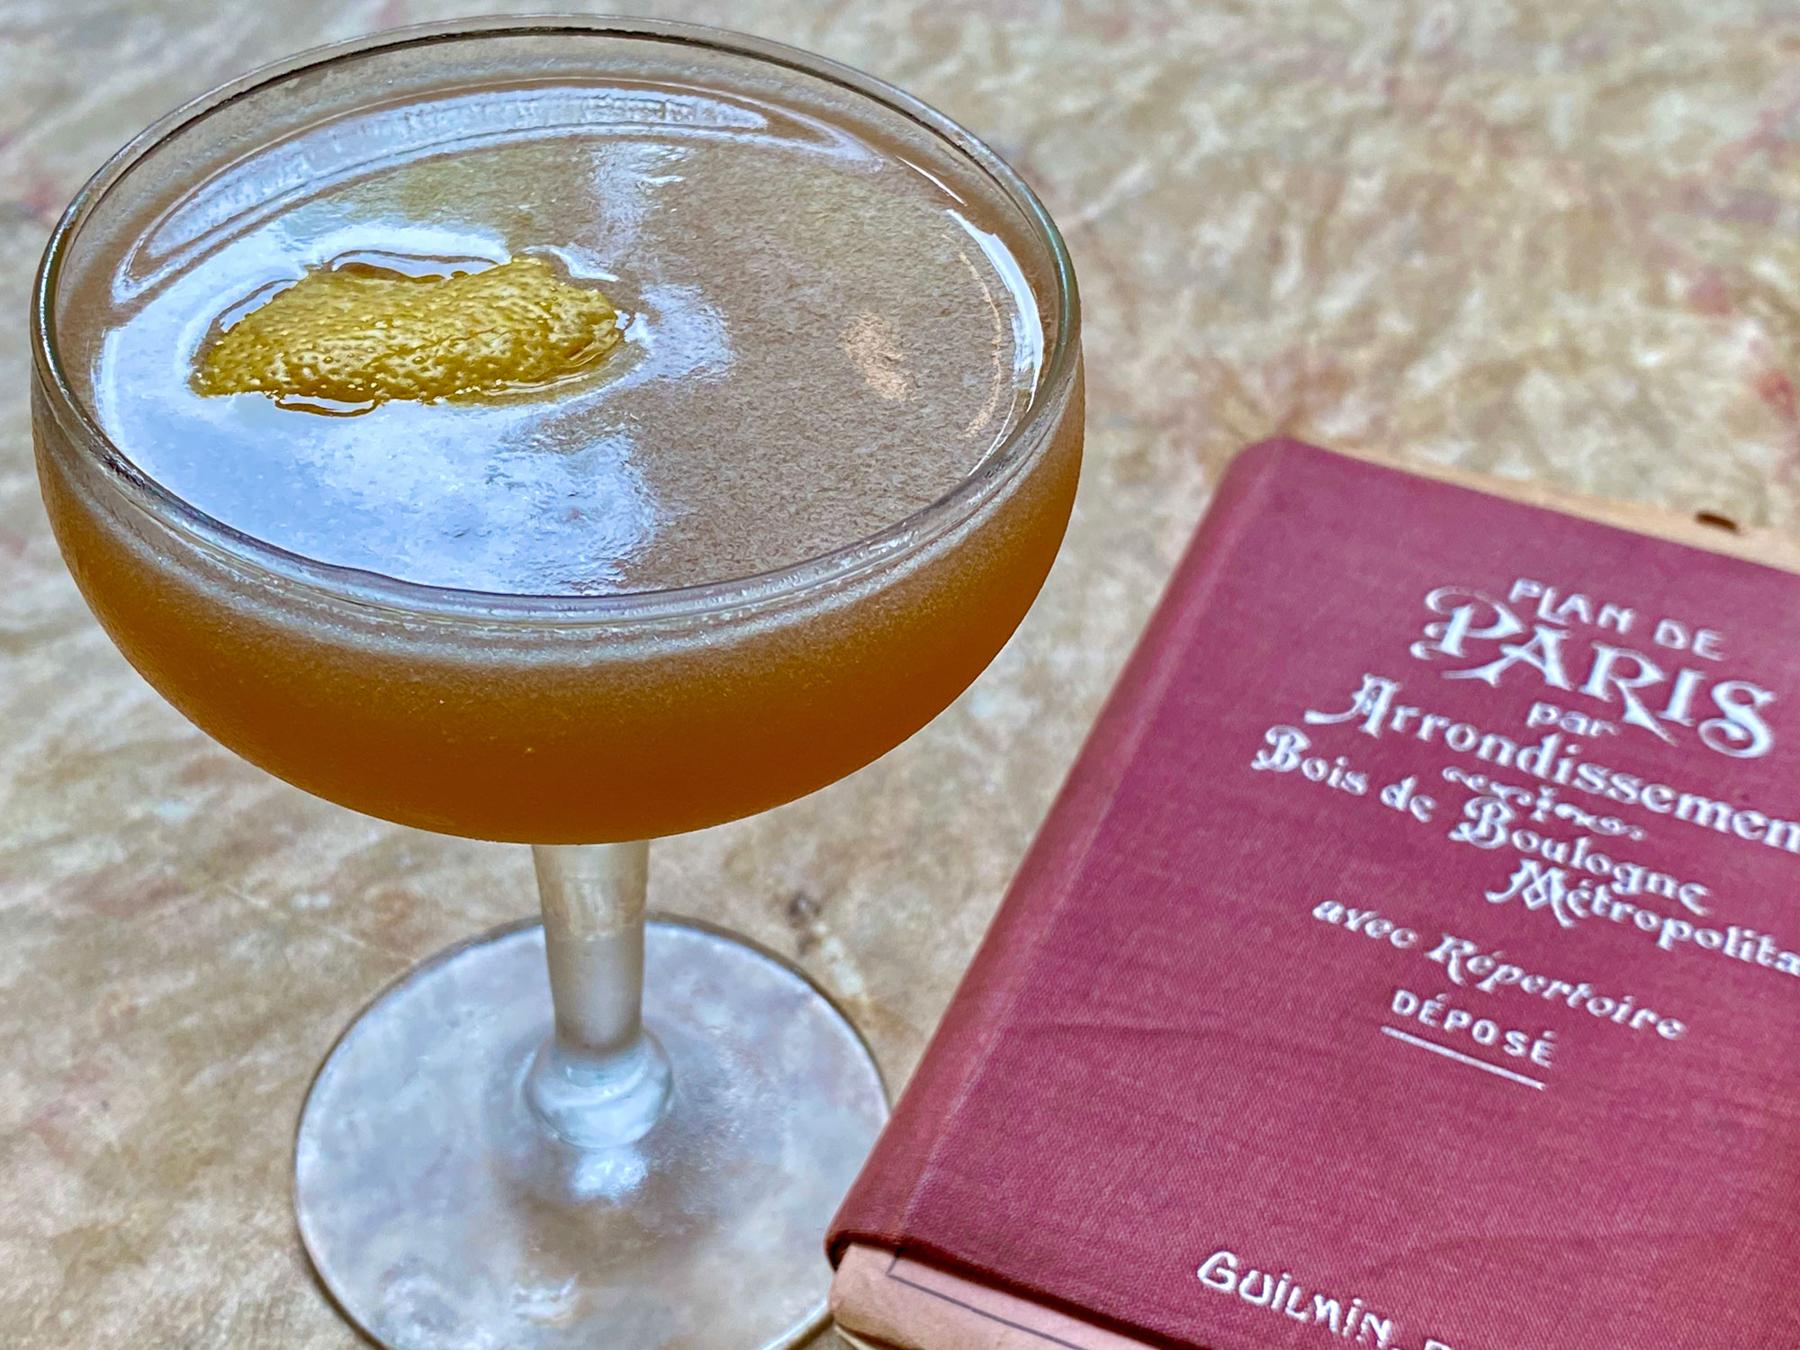 An example of the Champs Elysees, the mixed drink (drink), adapted from a drink in the Savoy Cocktail Book, featuring grape brandy, Dolin Génépy le Chamois Liqueur, lemon juice, simple syrup, Angostura bitters, and lemon twist; photo by Martin Doudoroff